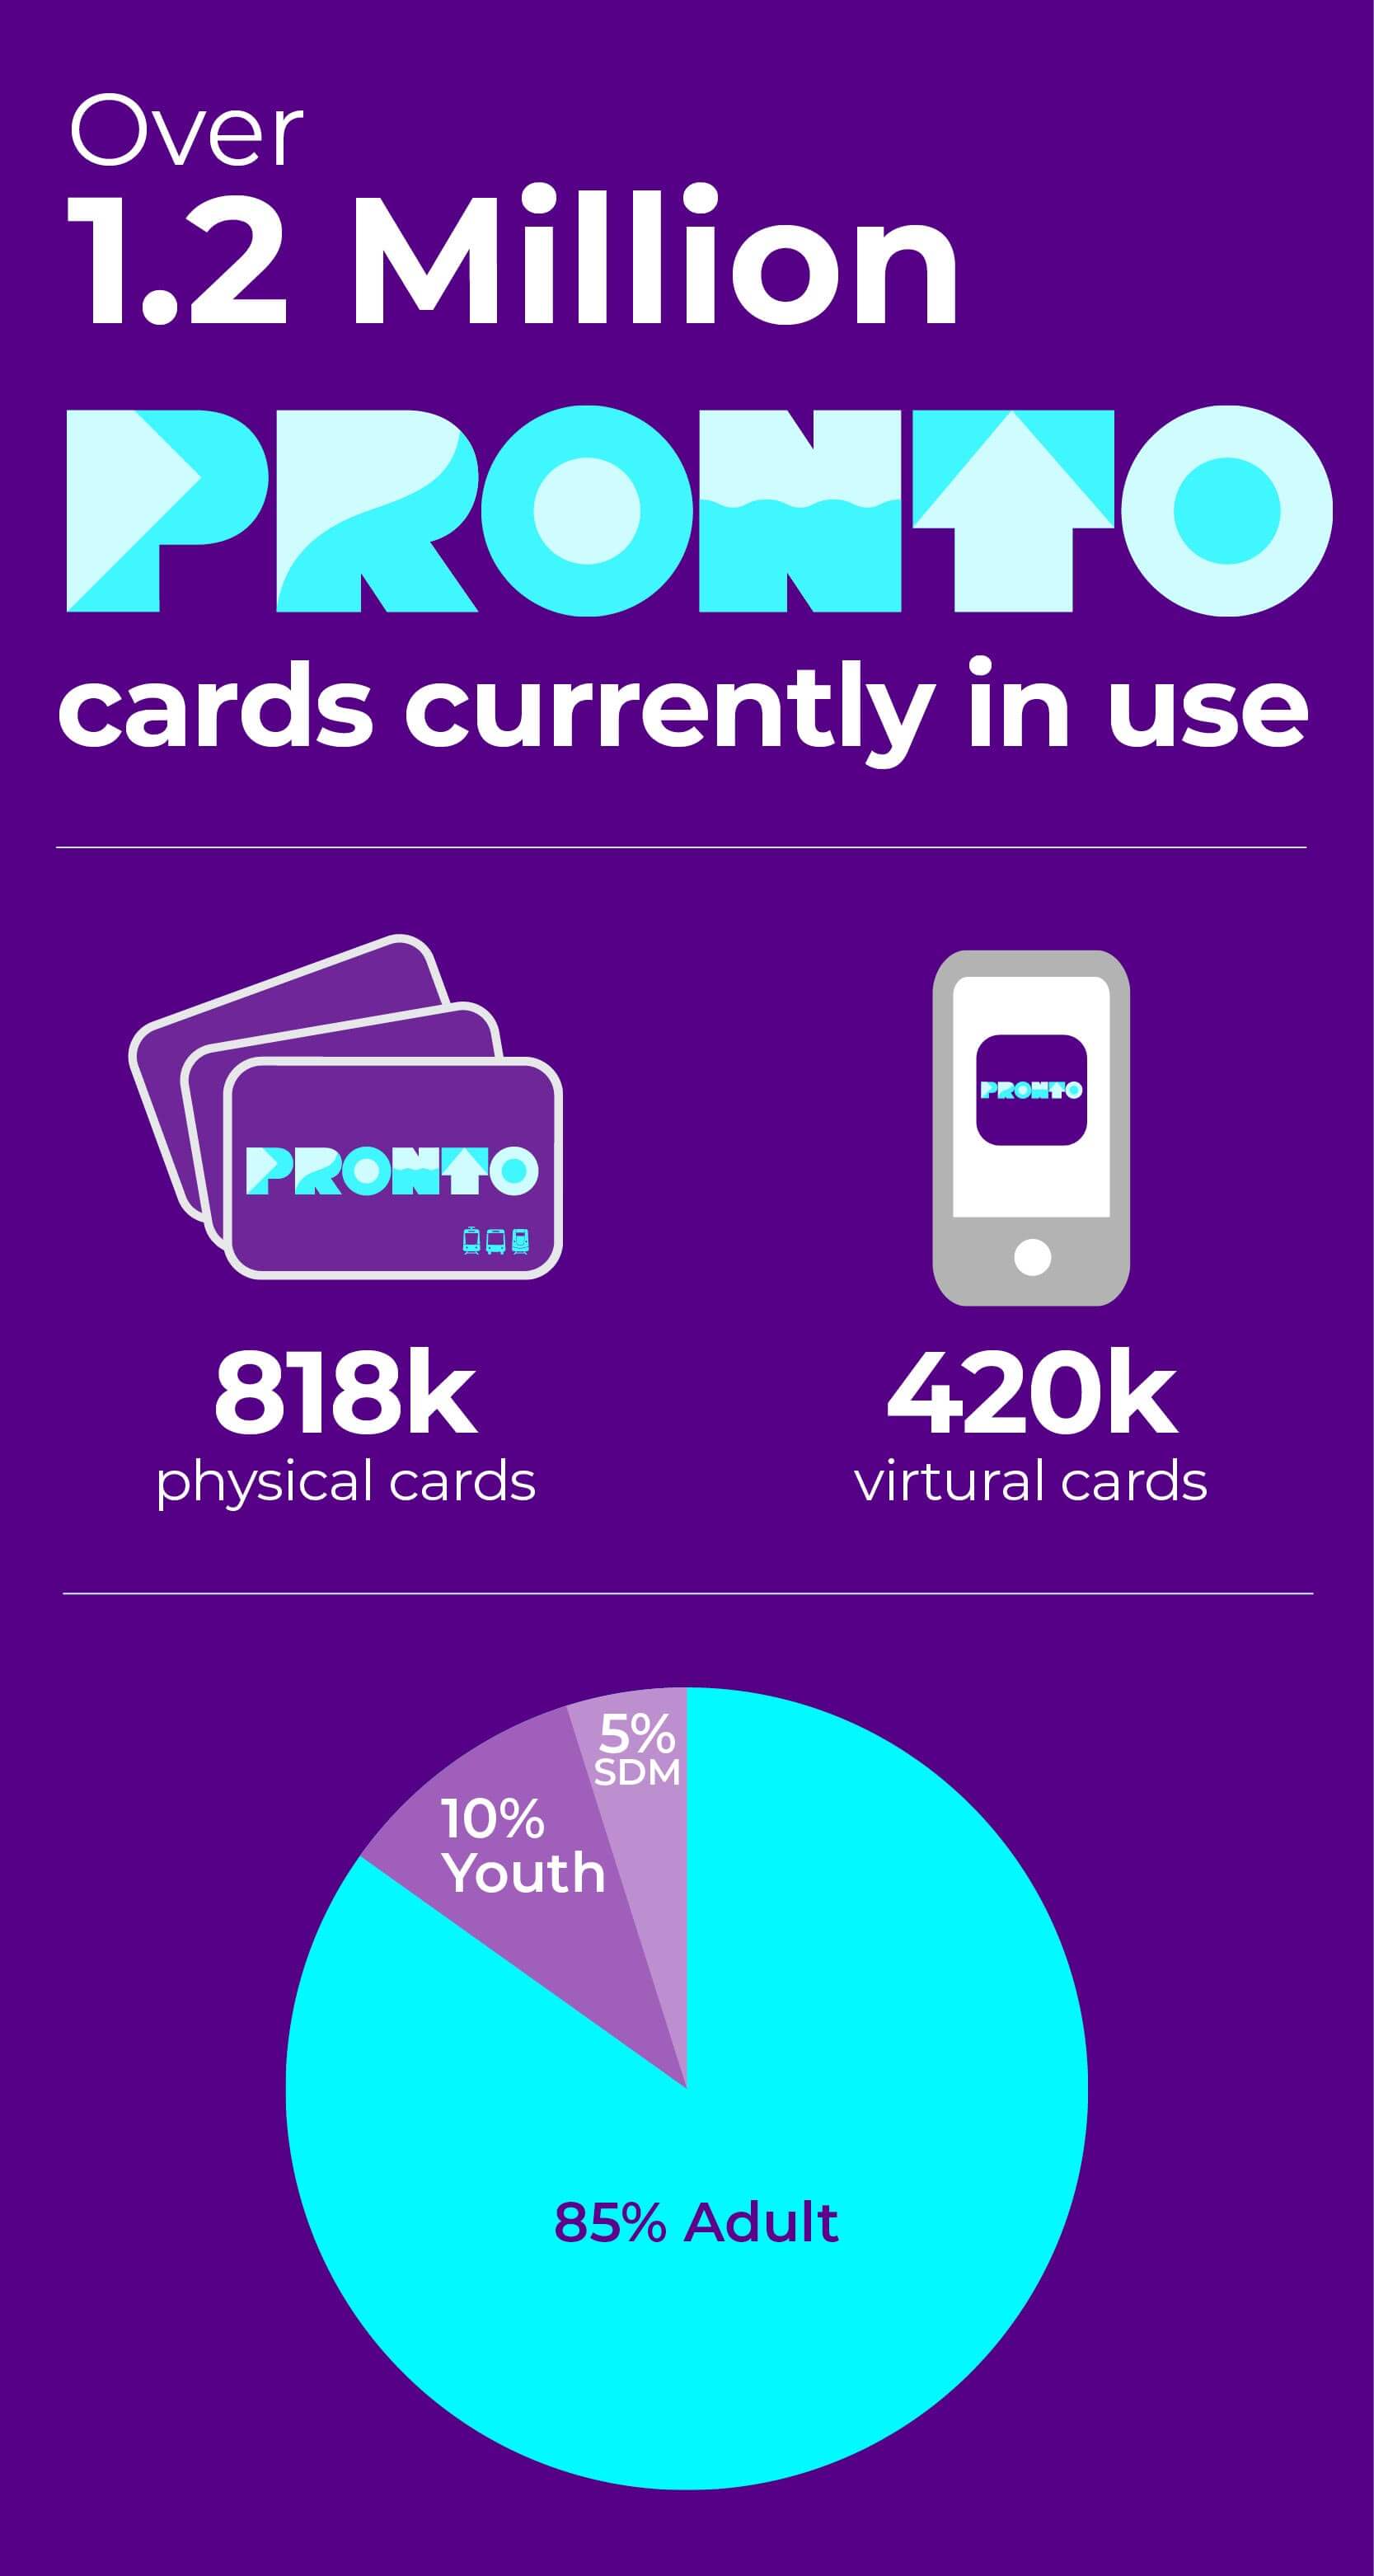 Over 1.2 million PRONTO cards currently in use with 818k PRONTO cards and 420k app accounts. 85% of all cards are Adult based cards, followed by 10% Youth cards and 5% SDM reduced fare cards.